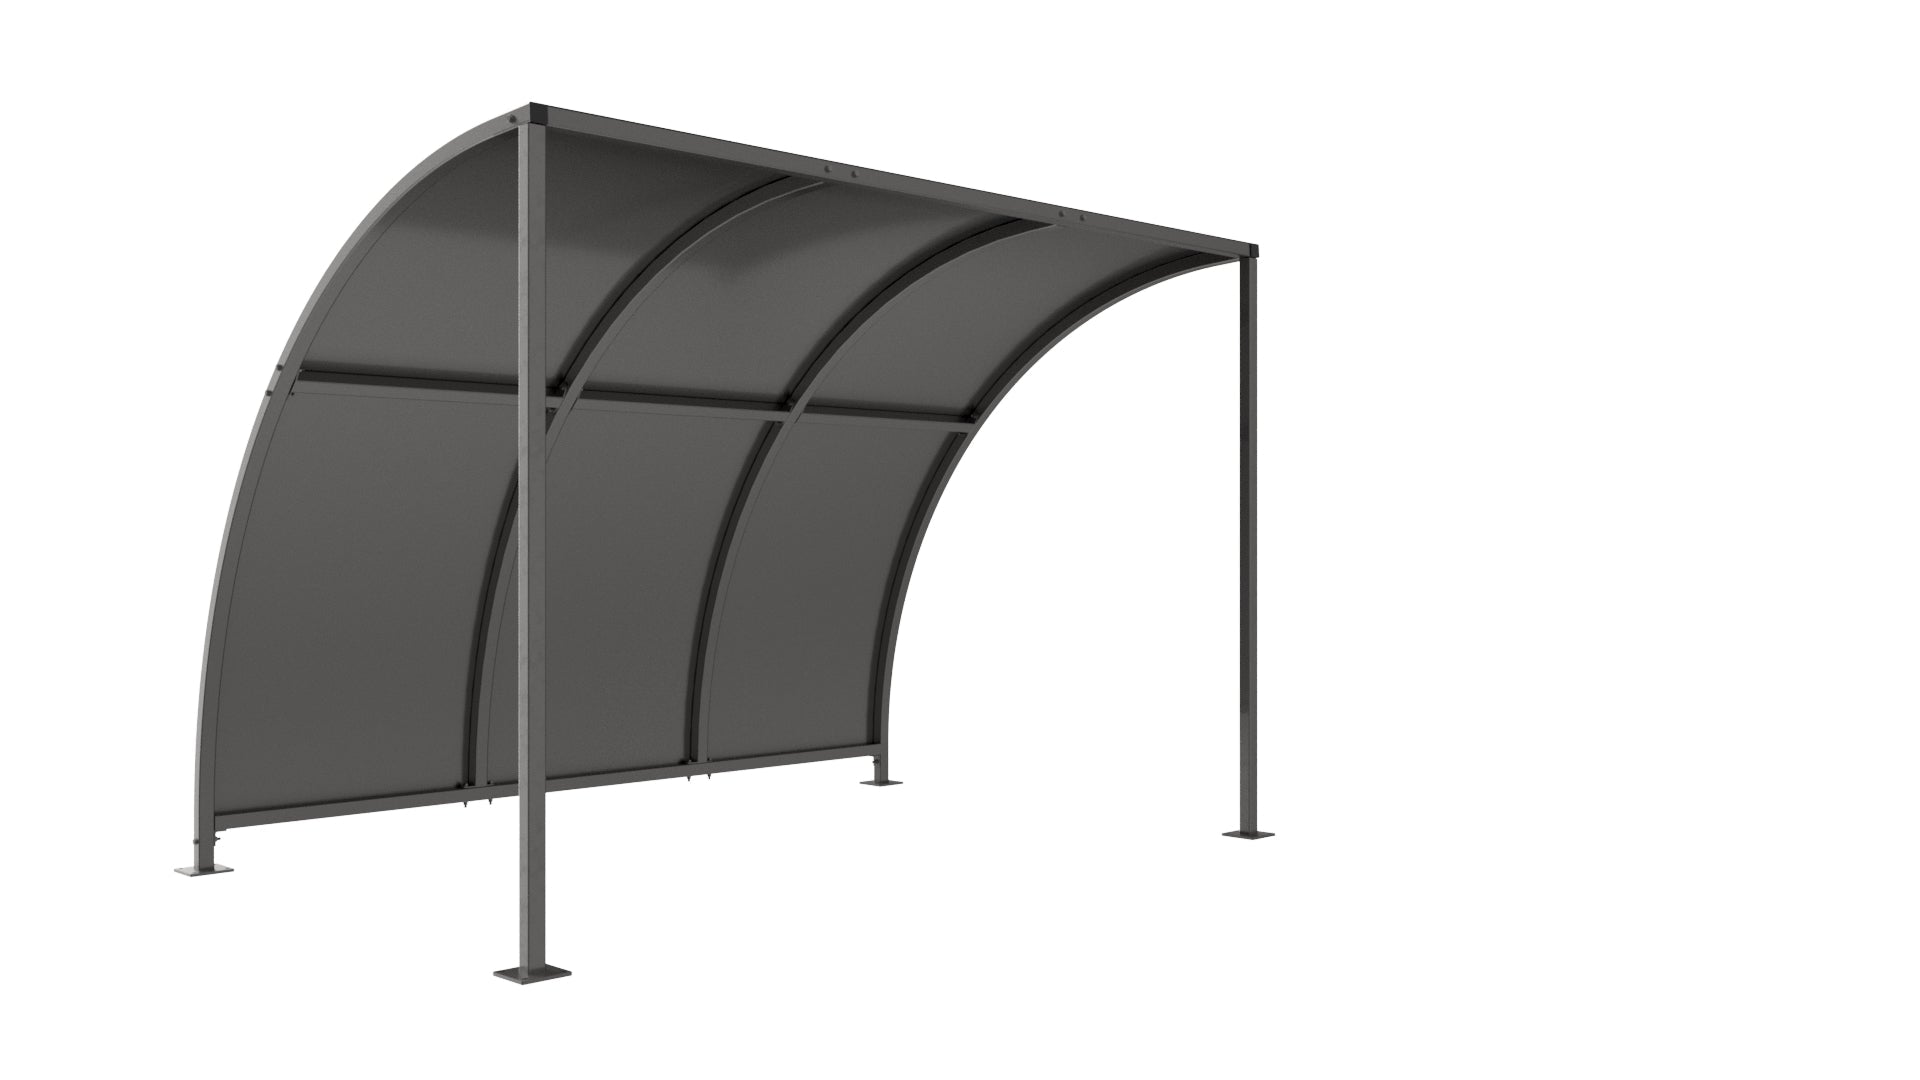 Leyton Cycle Shelter – Galvanised Roof Open Sided